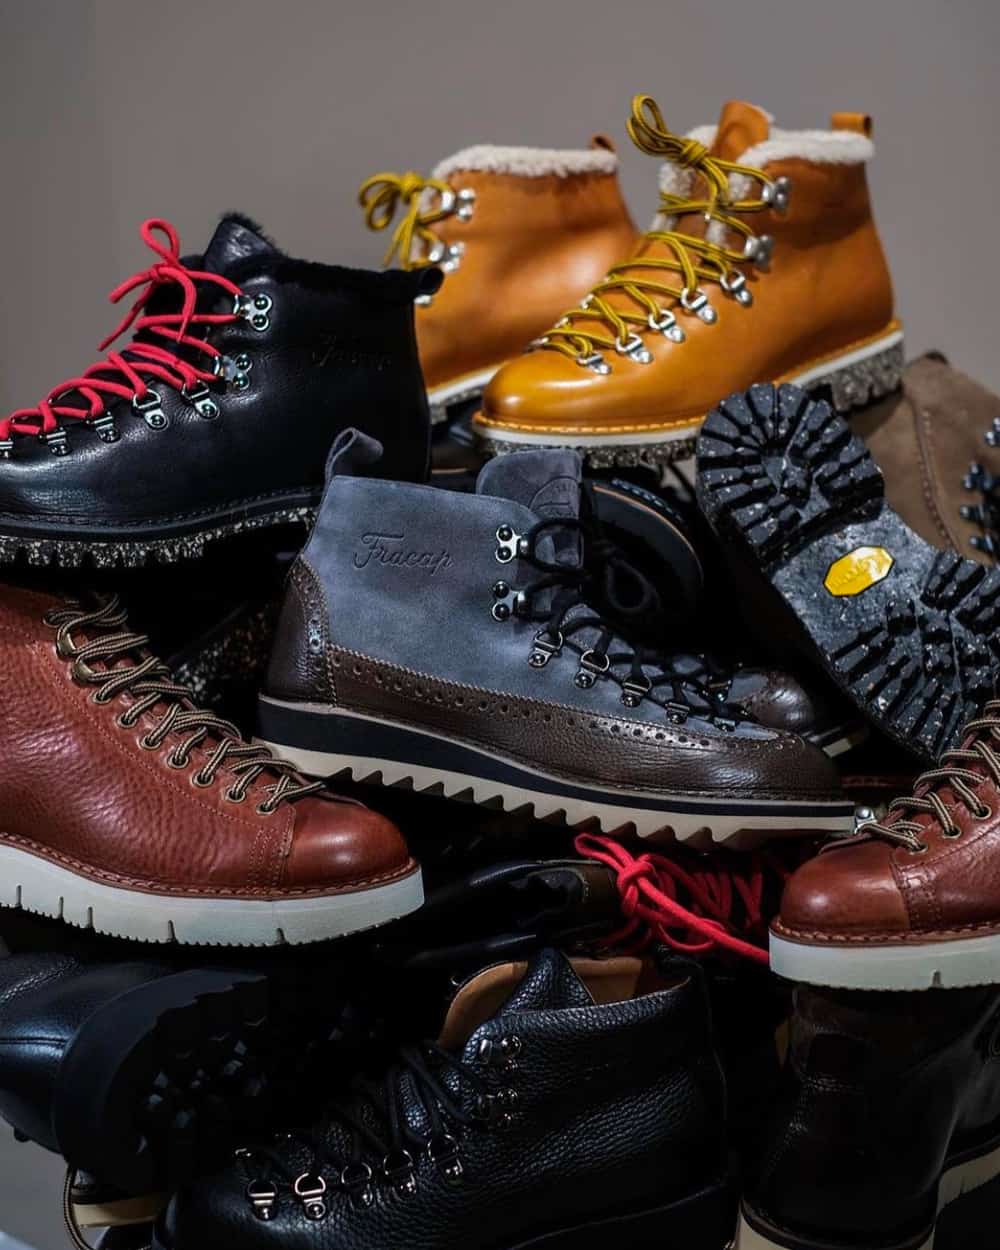 Fracap men's leather hiking boots in multiple colorways sitting in a pile